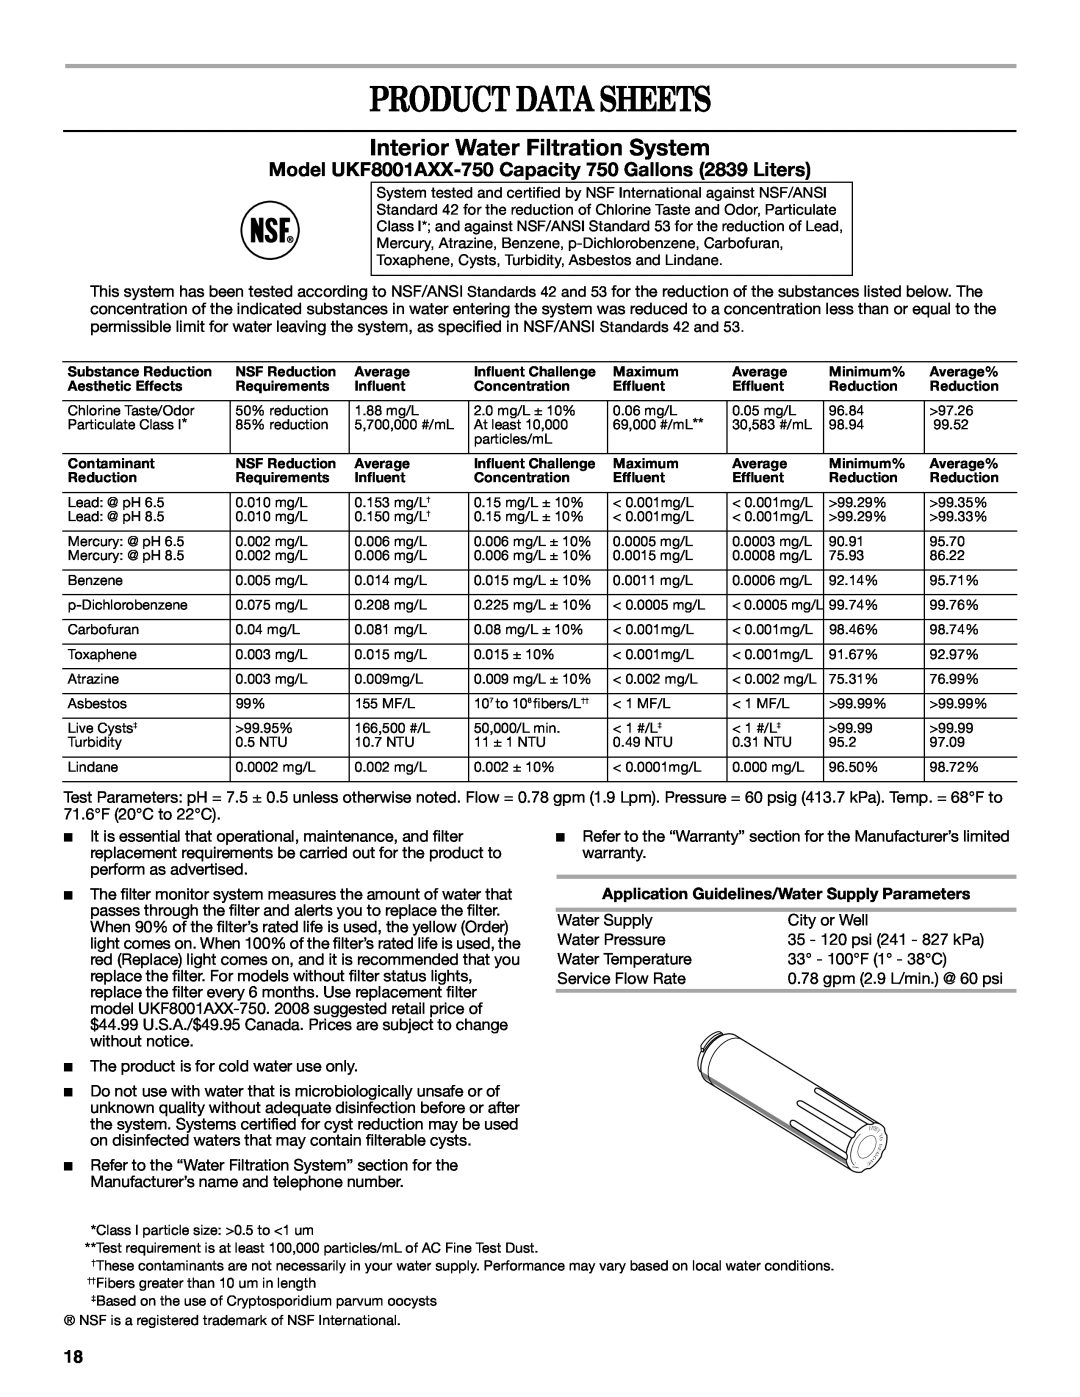 Whirlpool W10200283A Product Data Sheets, Interior Water Filtration System, Application Guidelines/Water Supply Parameters 